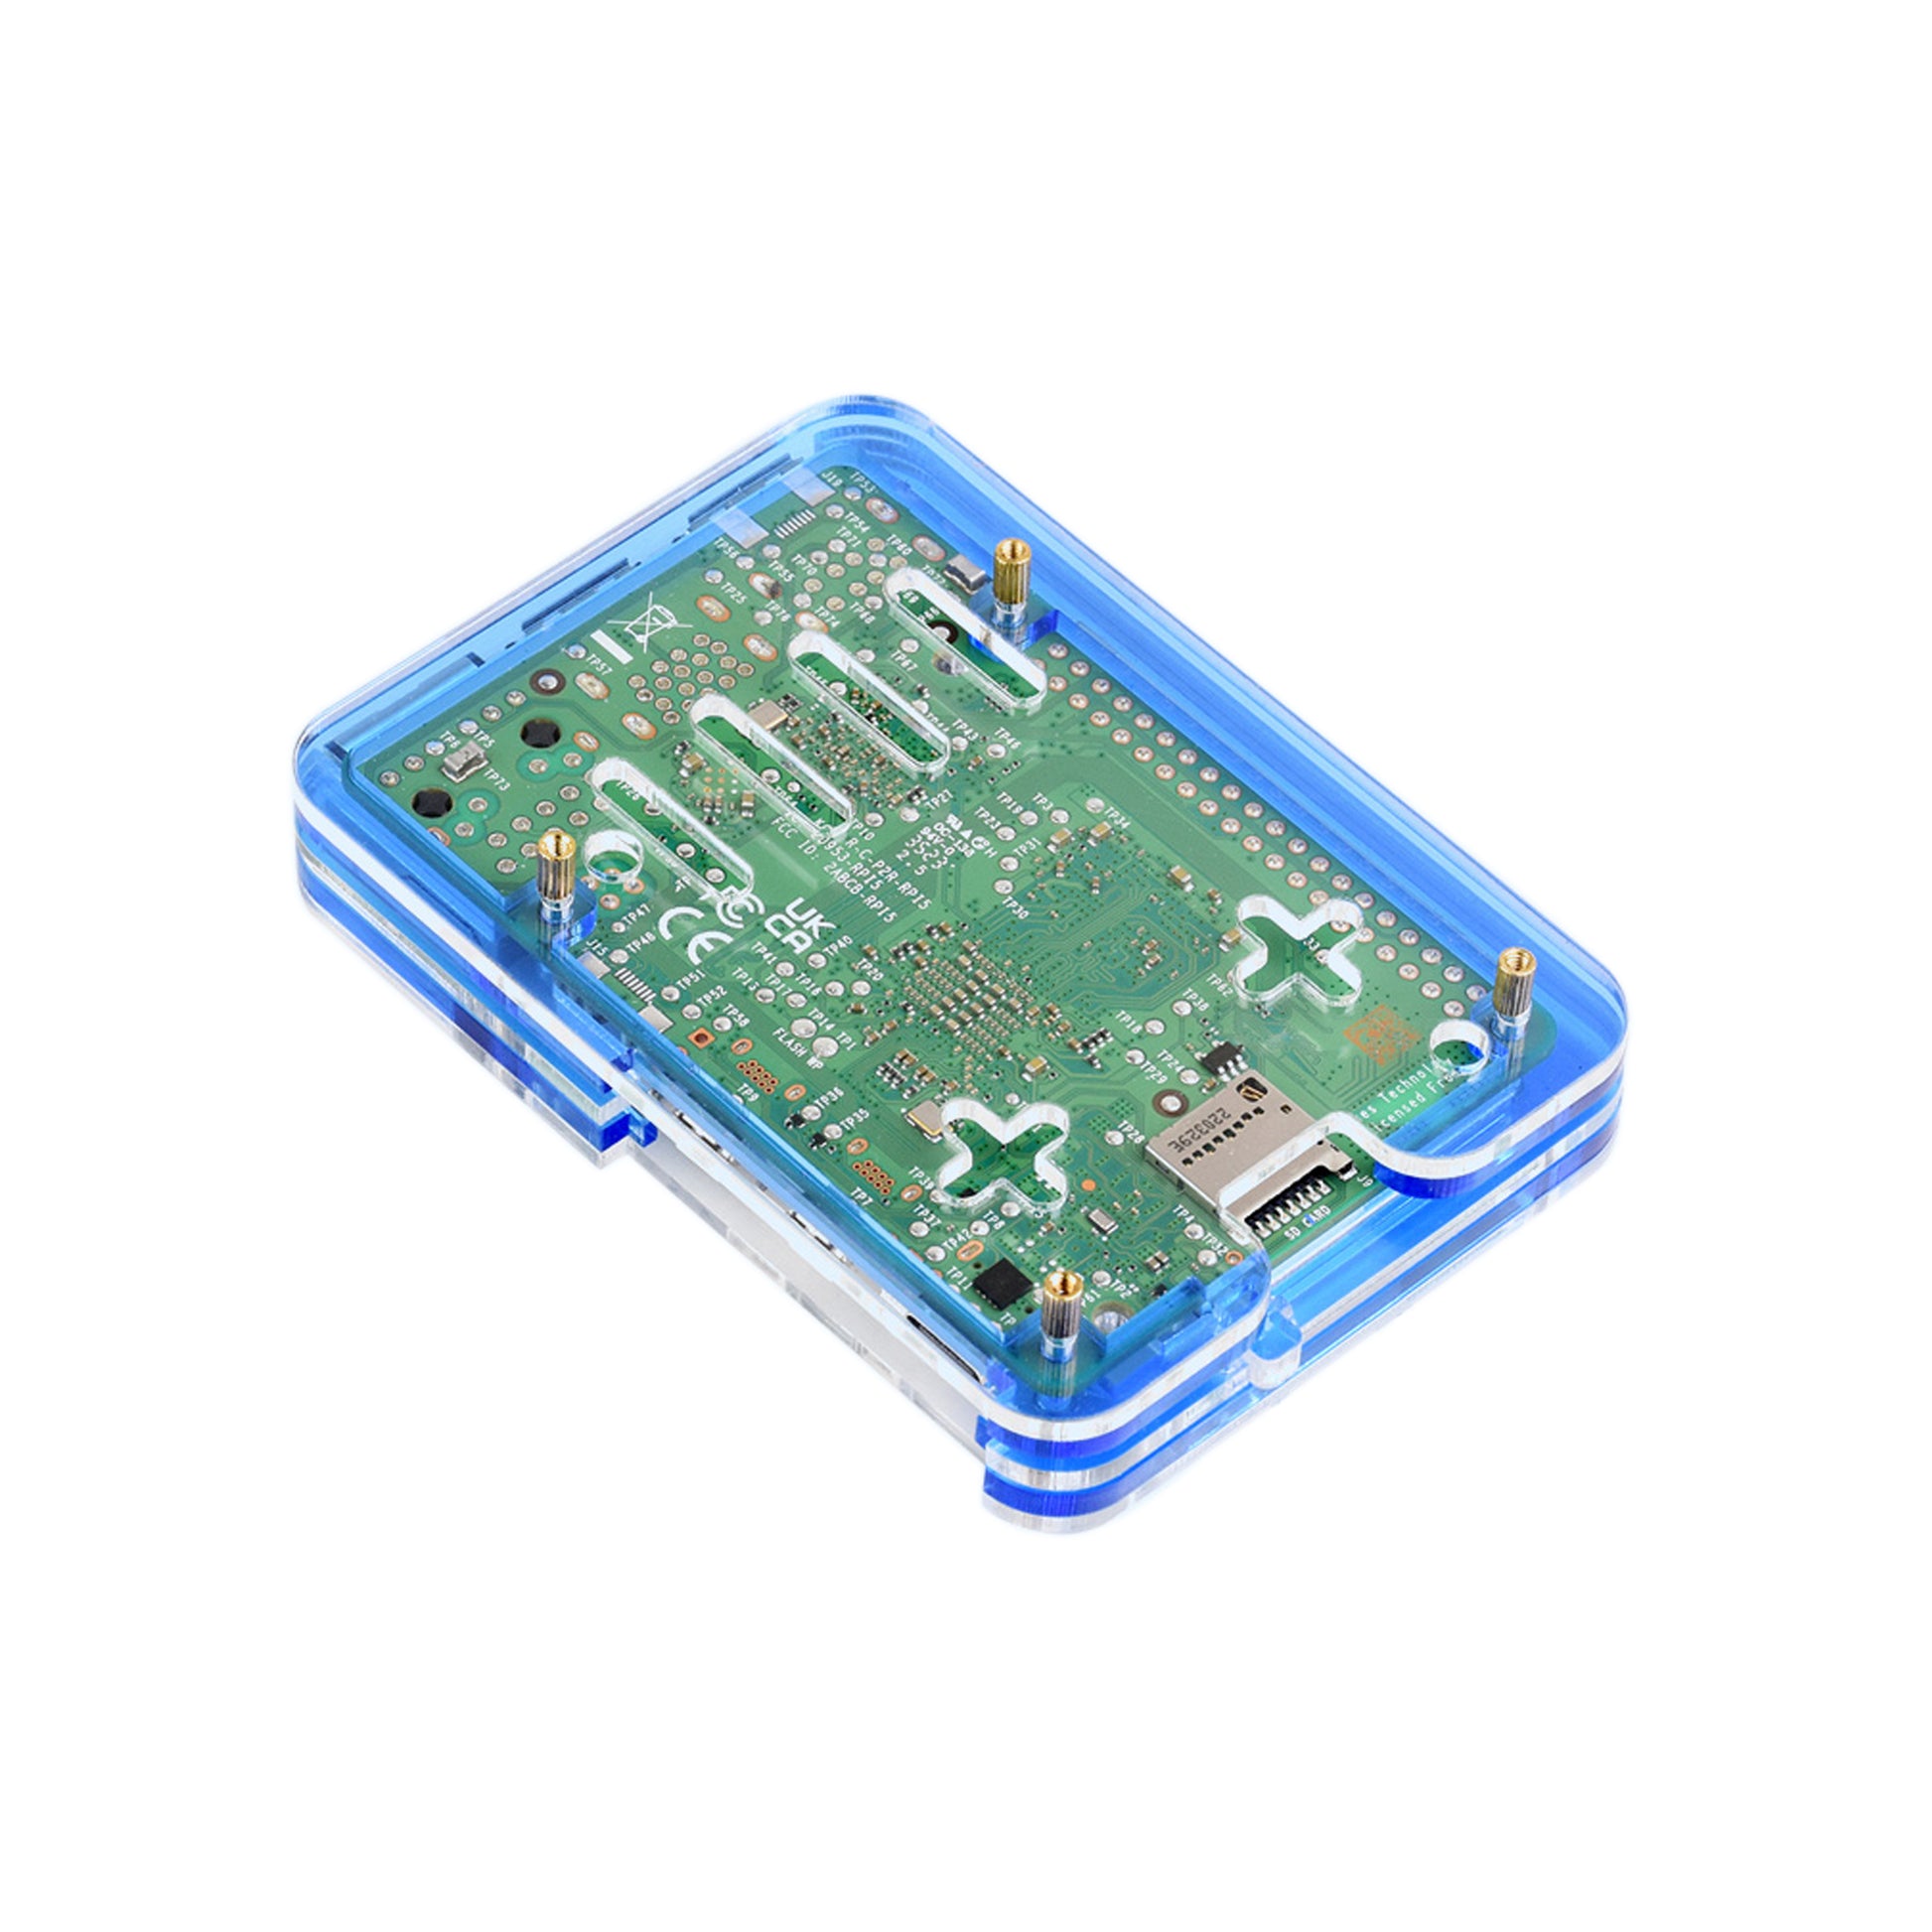 Raspberry Pi 5 5 Layer Case Raspberry Pi 5 Acrylic Shell Compatible with Active Cooler for Raspberry Pi 5 4GB, 8GB - Blue - RS5772 - REES52